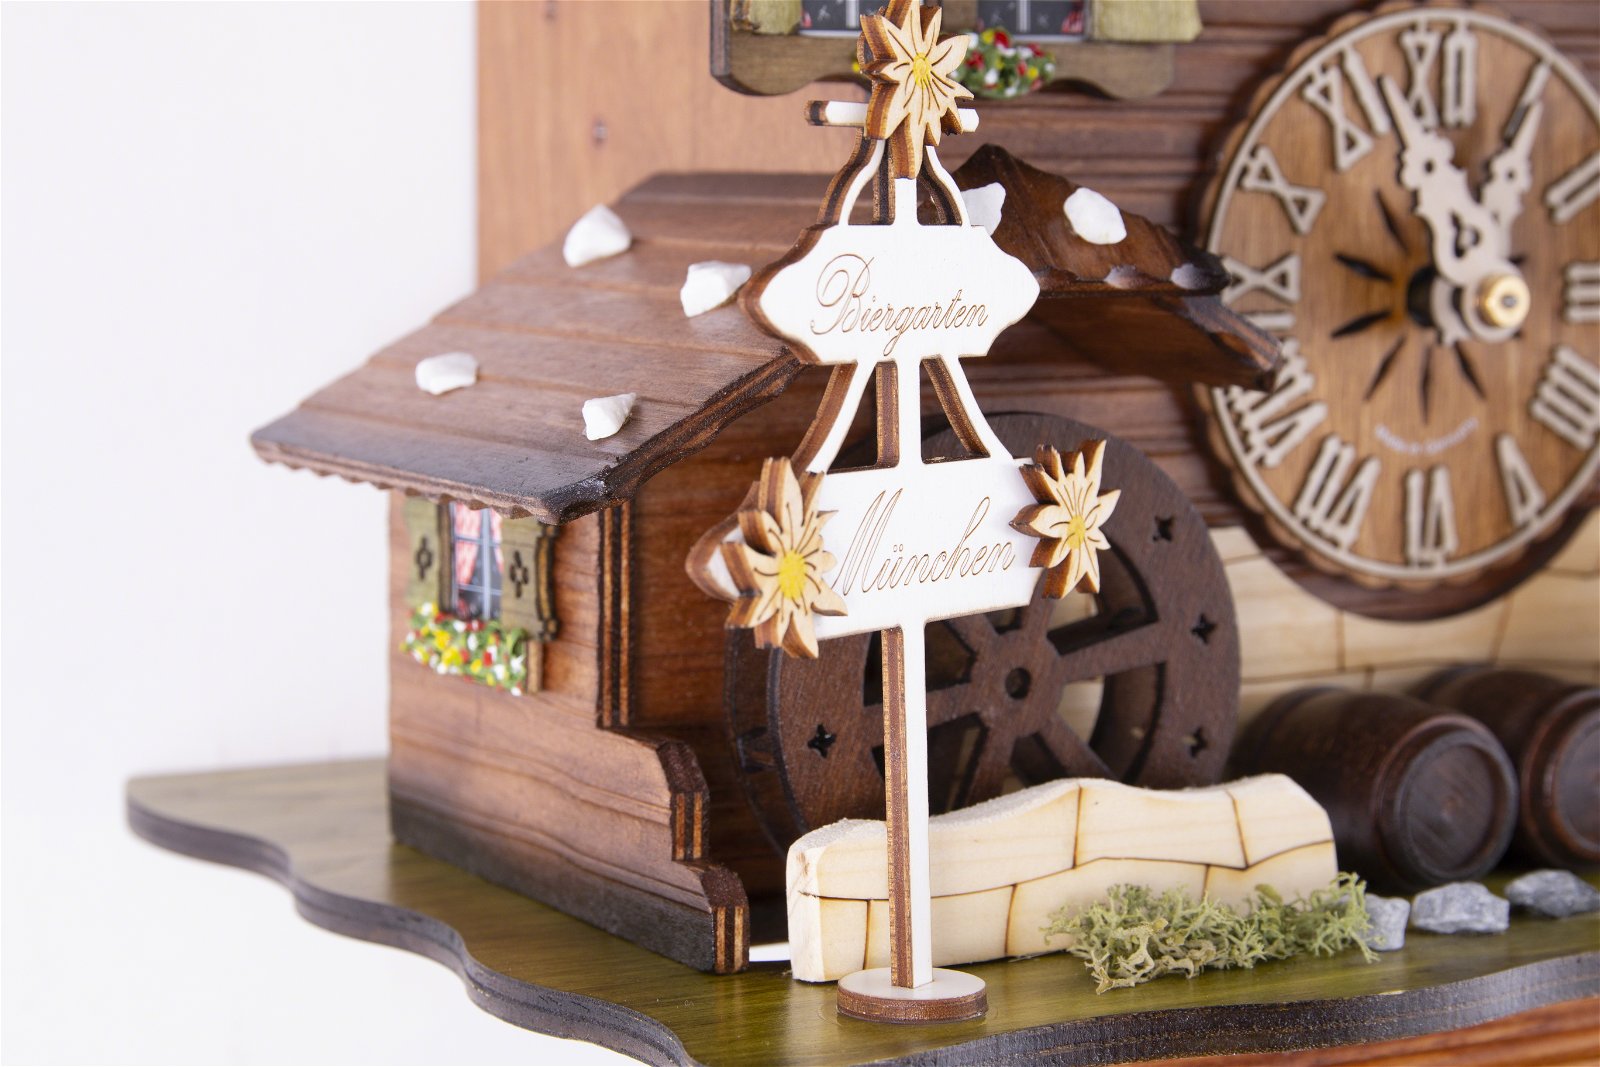 Cuckoo Clock 8-day-movement Chalet-Style 32cm by Hekas